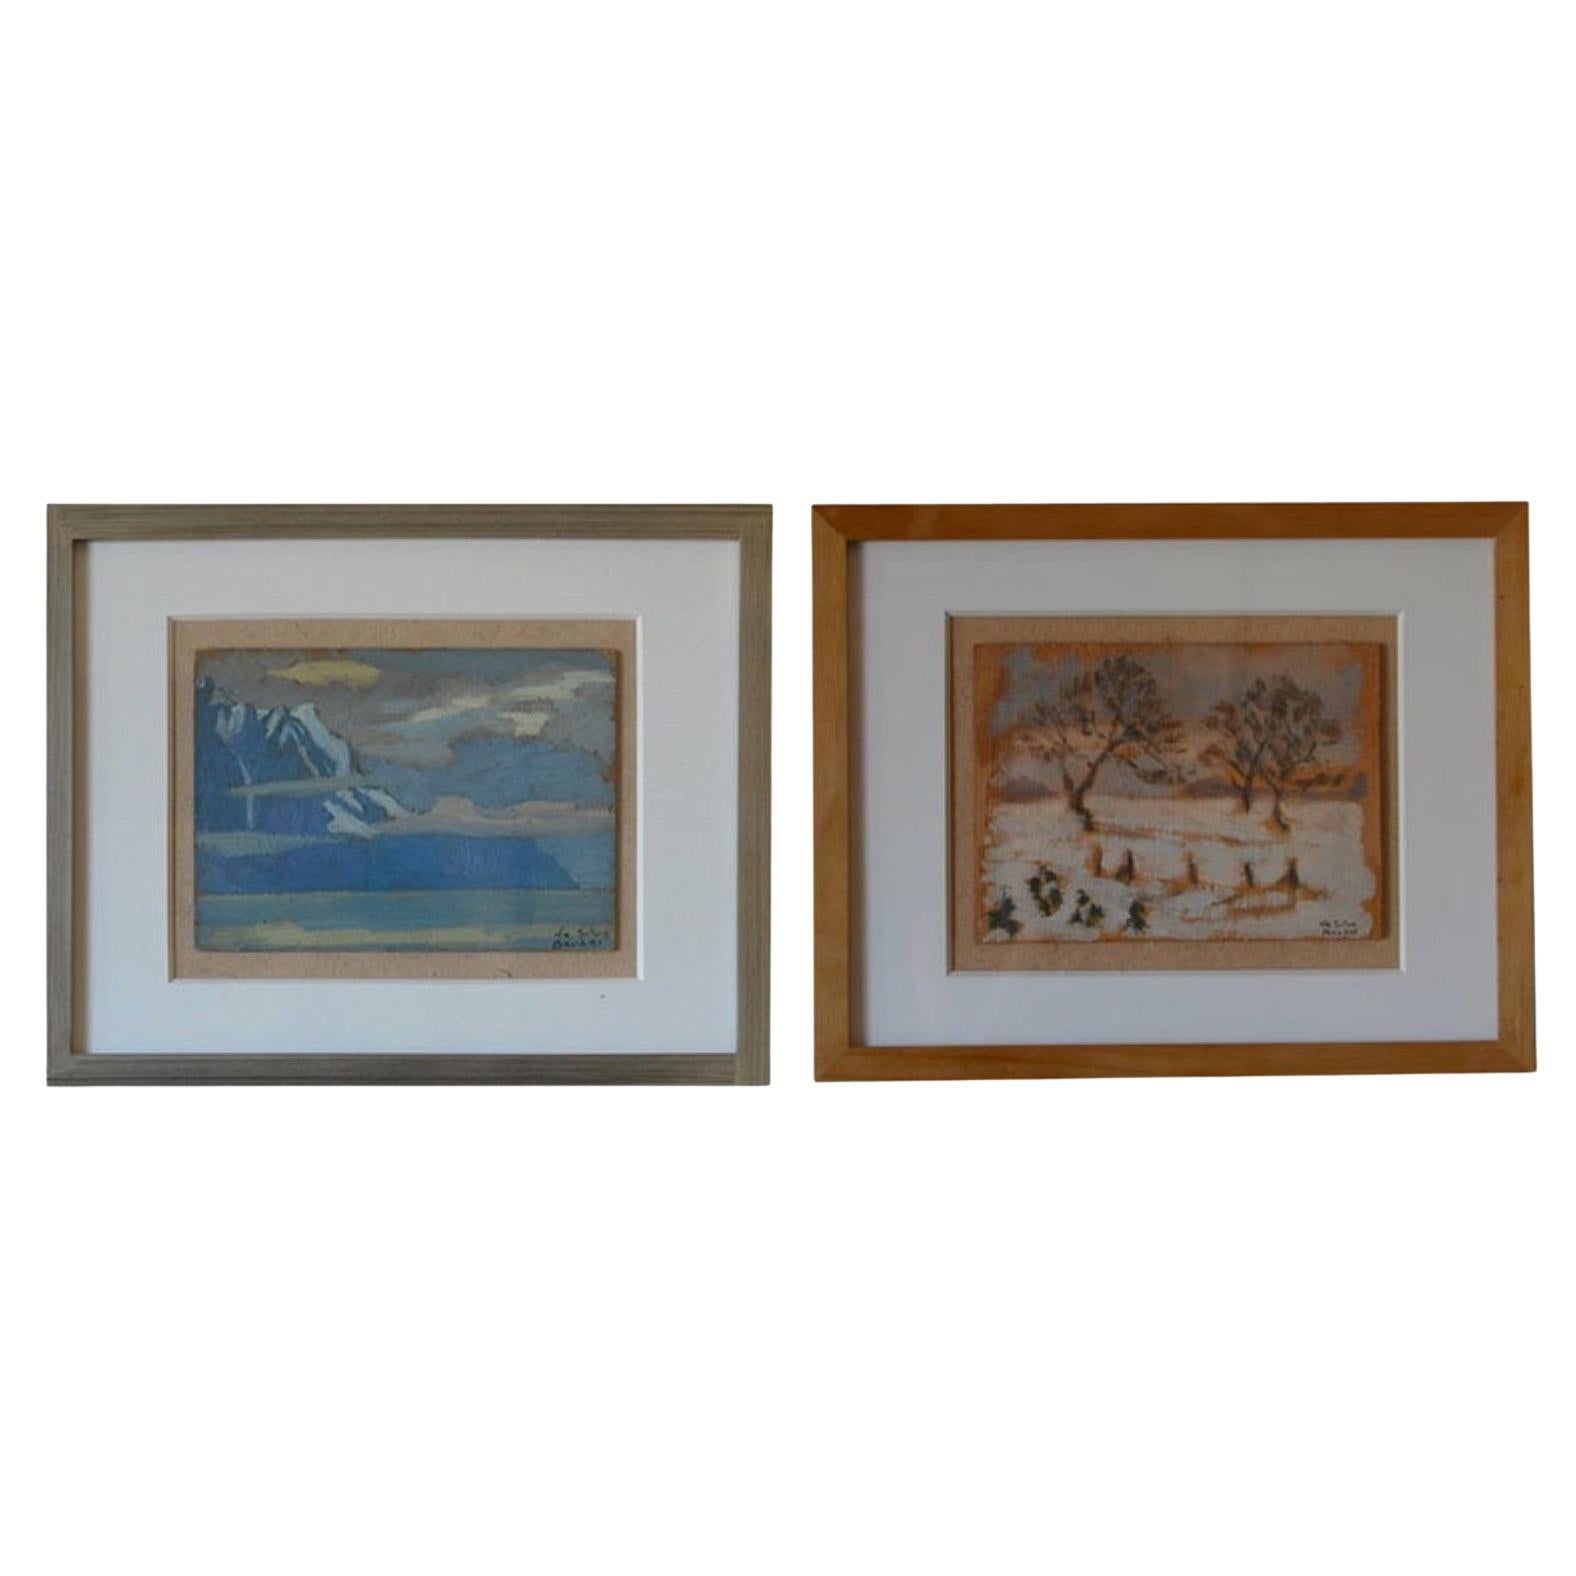 Rare Set of Two Framed Oil Paintings by Ivan da Silva Bruhns